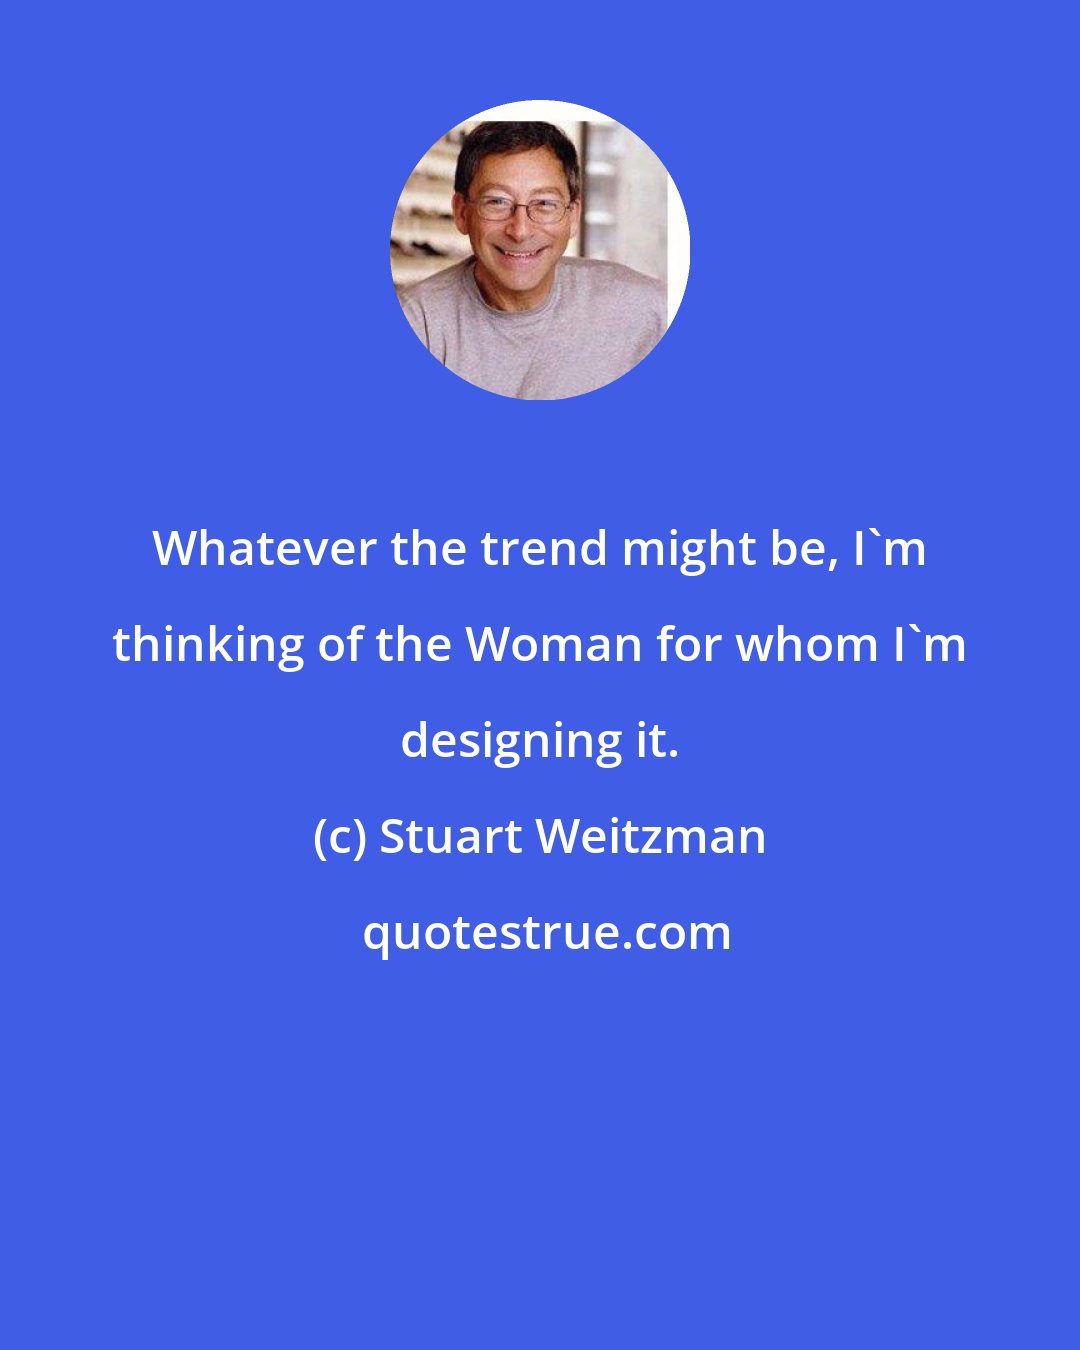 Stuart Weitzman: Whatever the trend might be, I'm thinking of the Woman for whom I'm designing it.